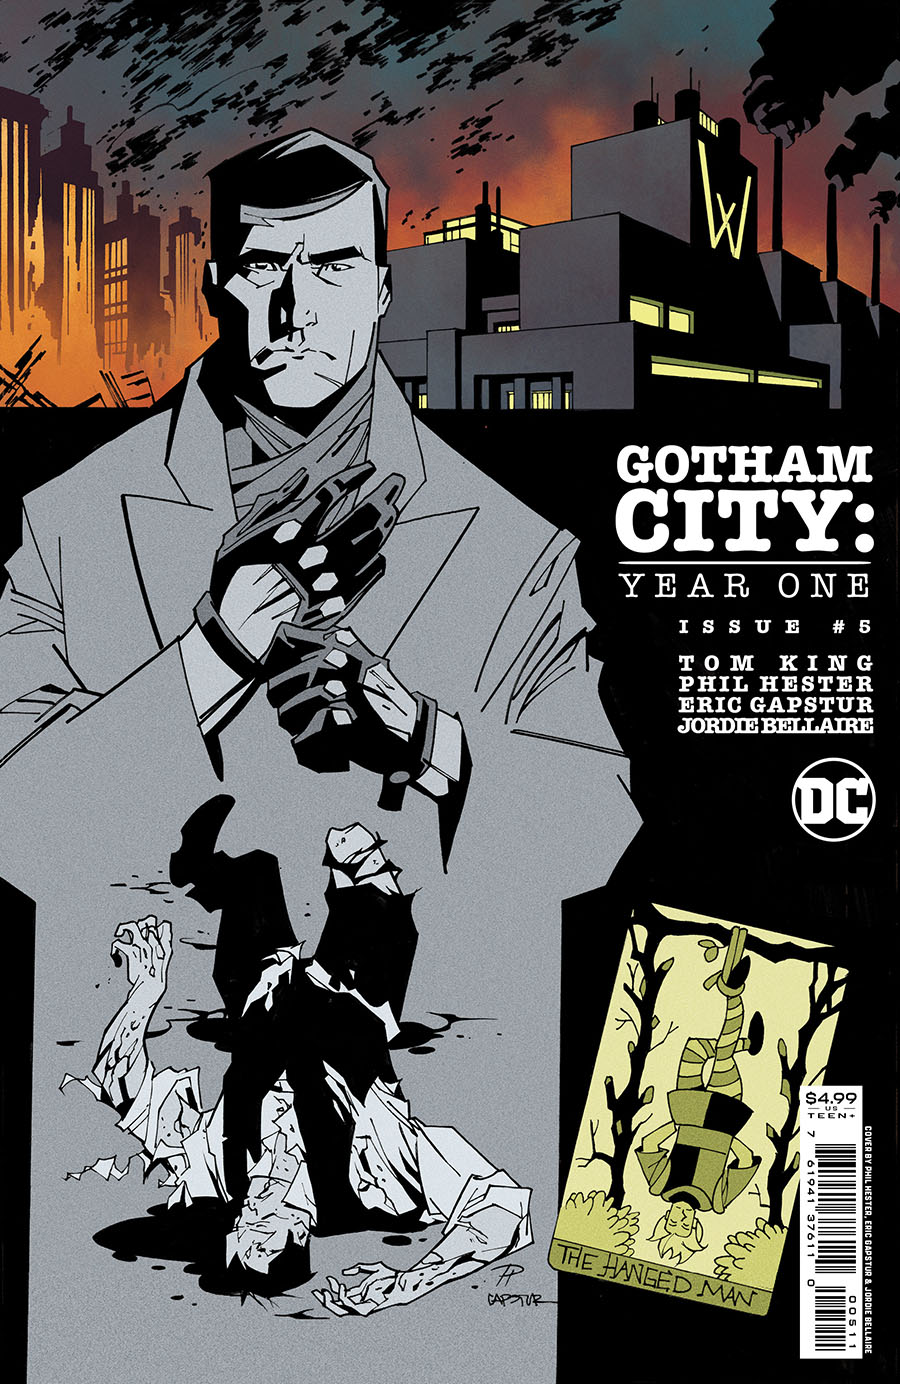 Gotham City Year One #5 Cover A Regular Phil Hester & Eric Gapstur Cover